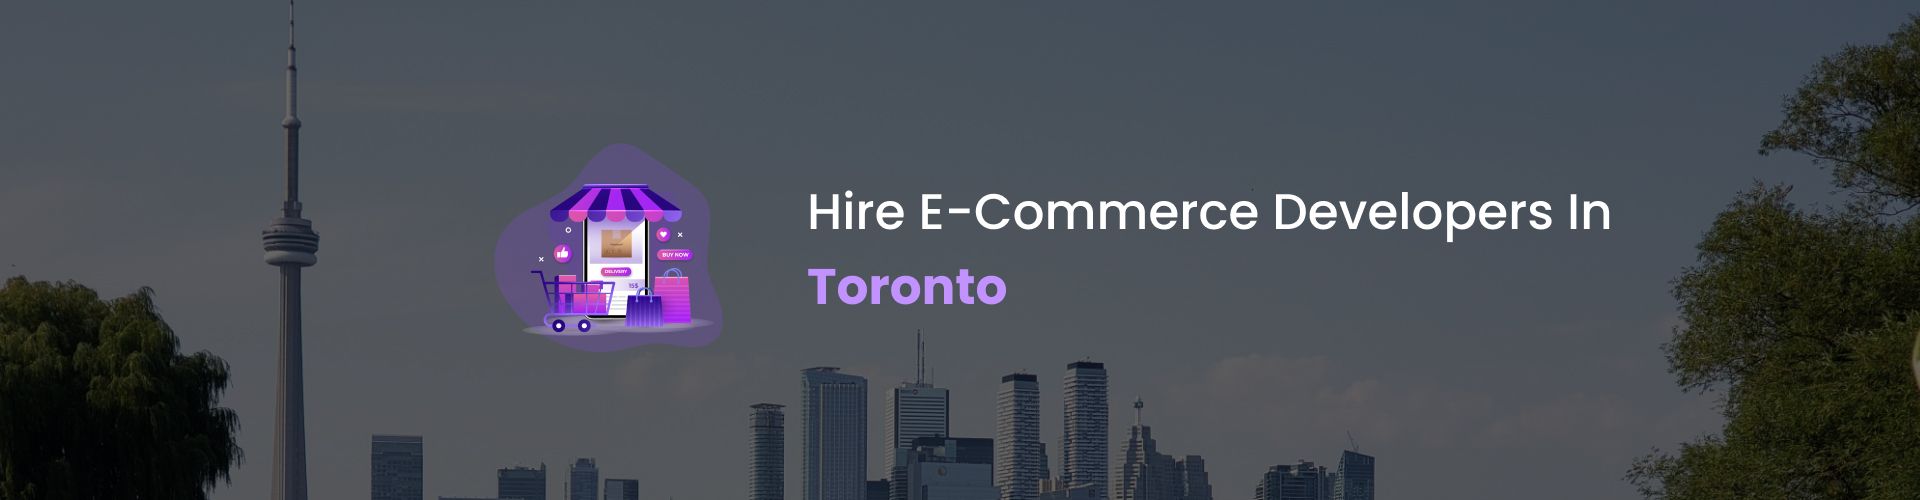 hire ecommerce developers in toronto